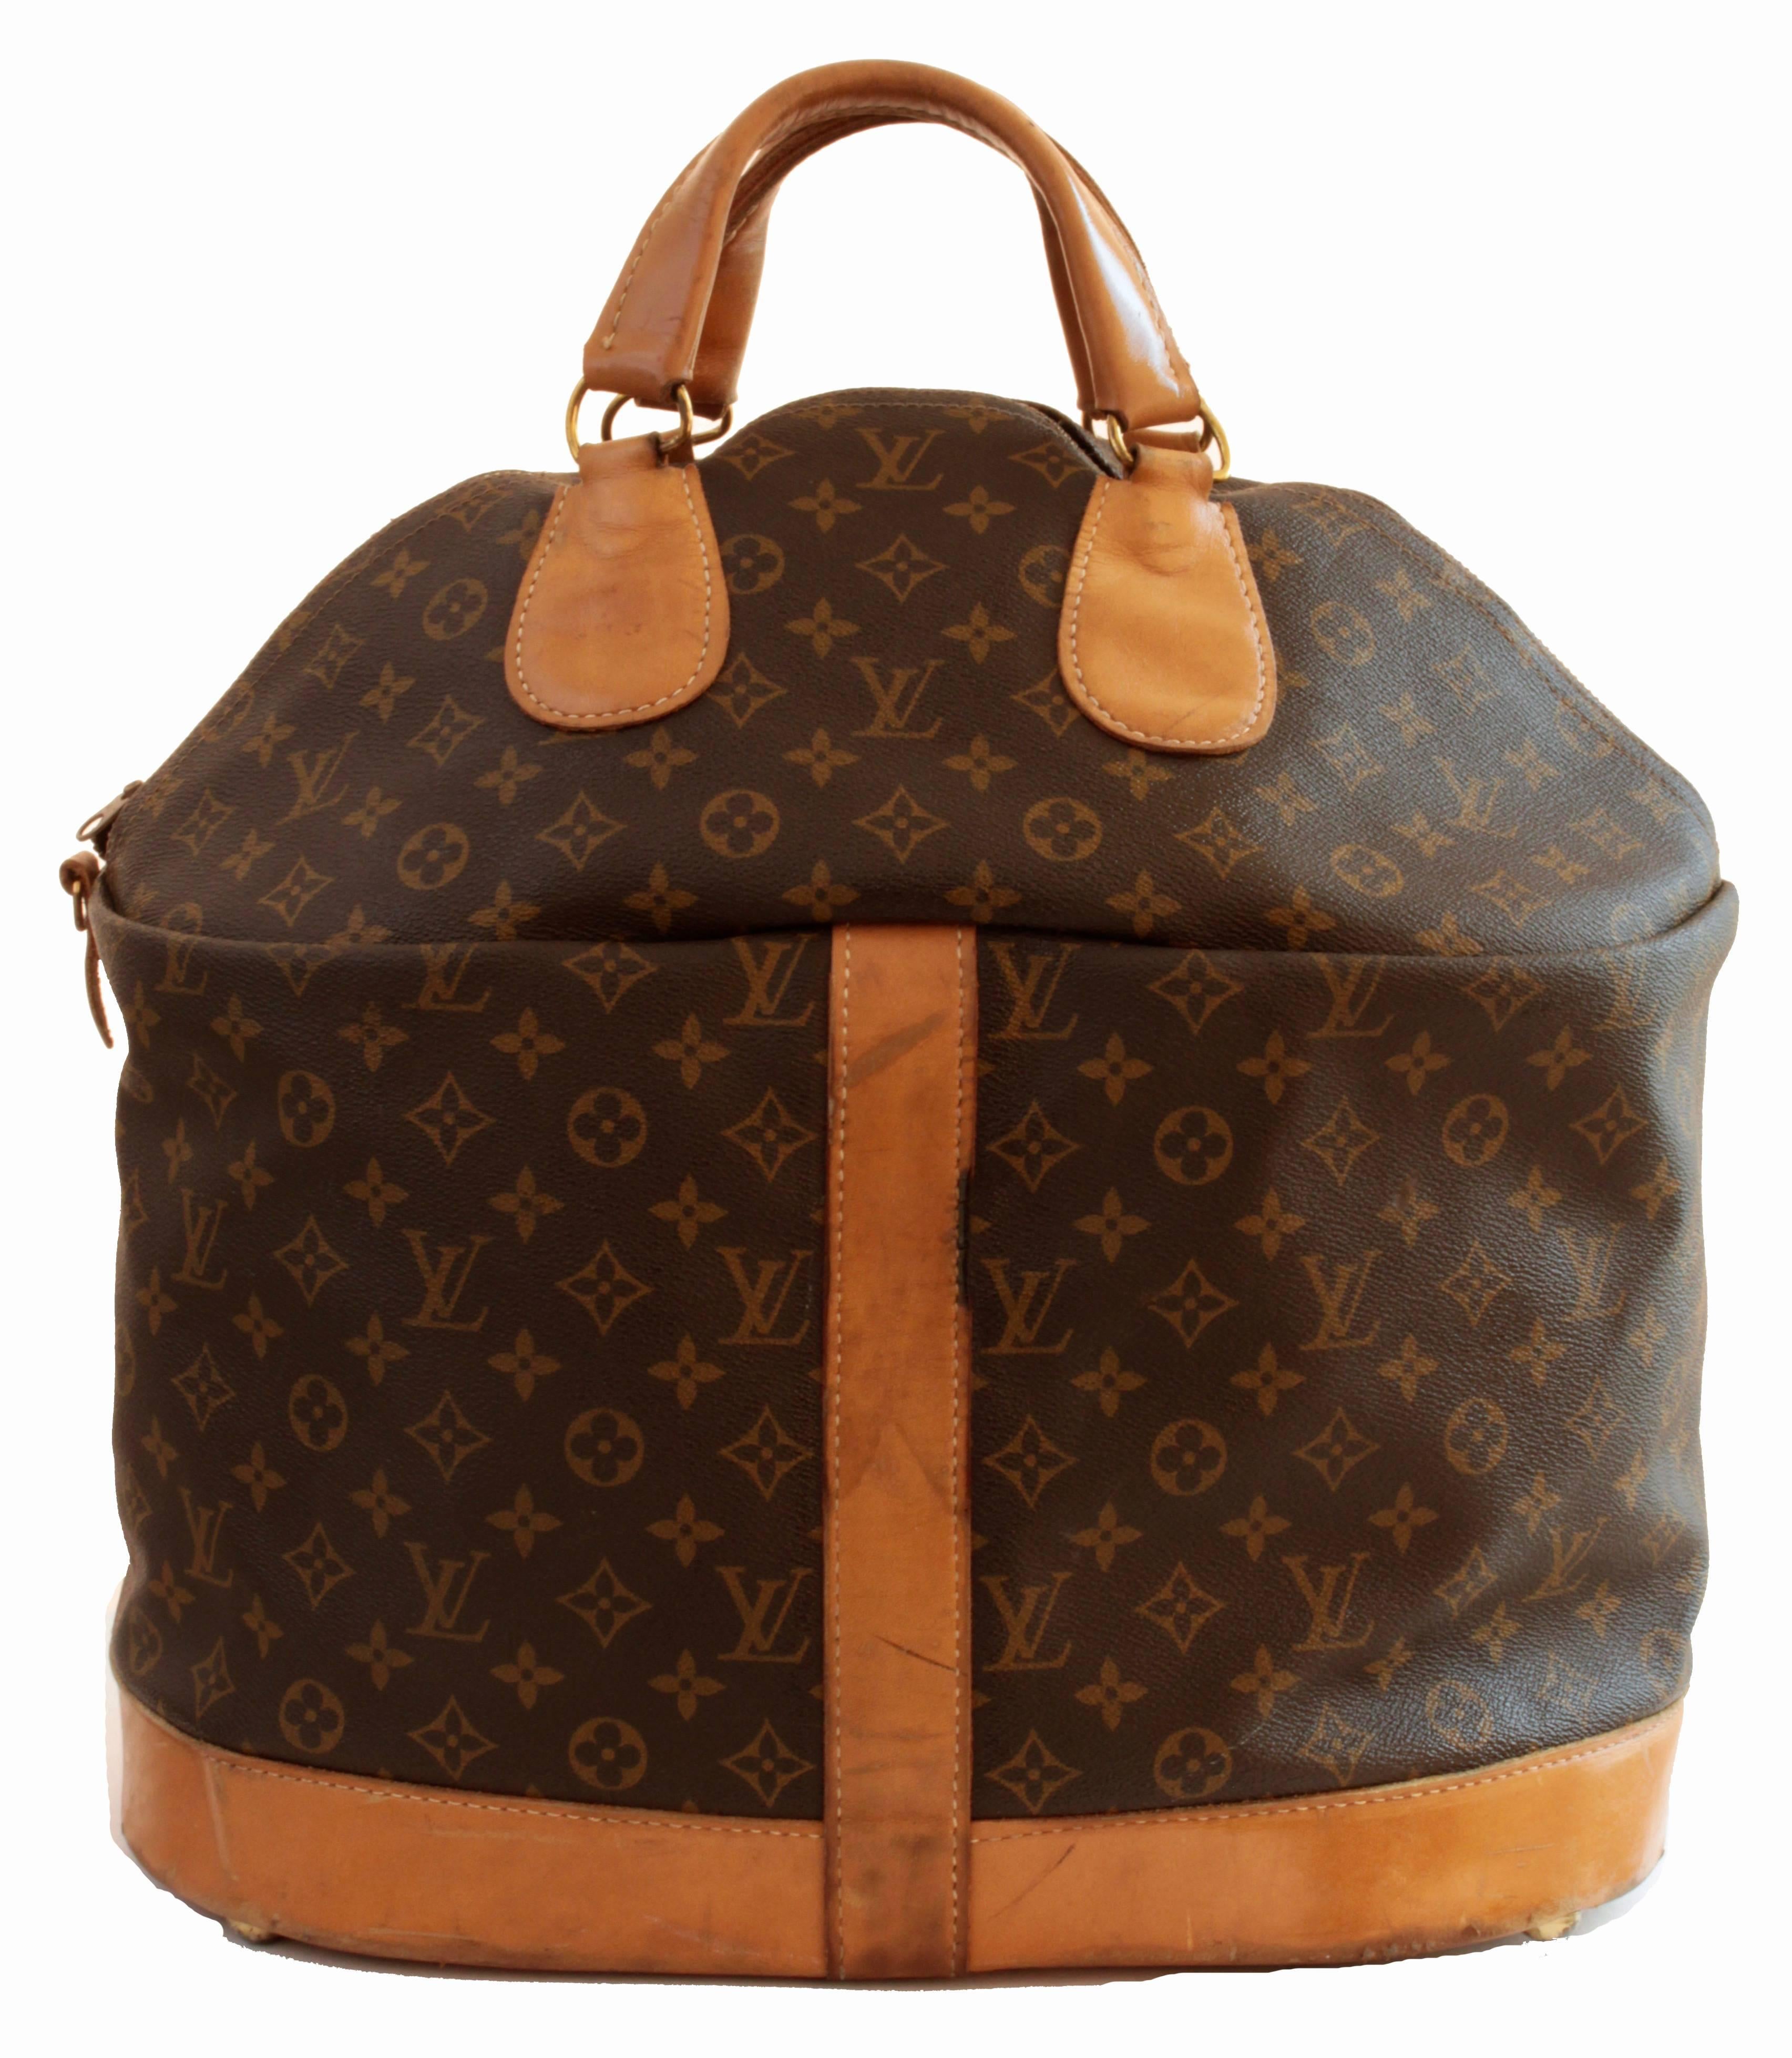 This large travel bag was originally sold by Saks 5th Ave and made under special license by The French Company for Louis Vuitton, long before LV had a boutique presence in the USA.  Produced for only a short period, these incredible bags are so hard